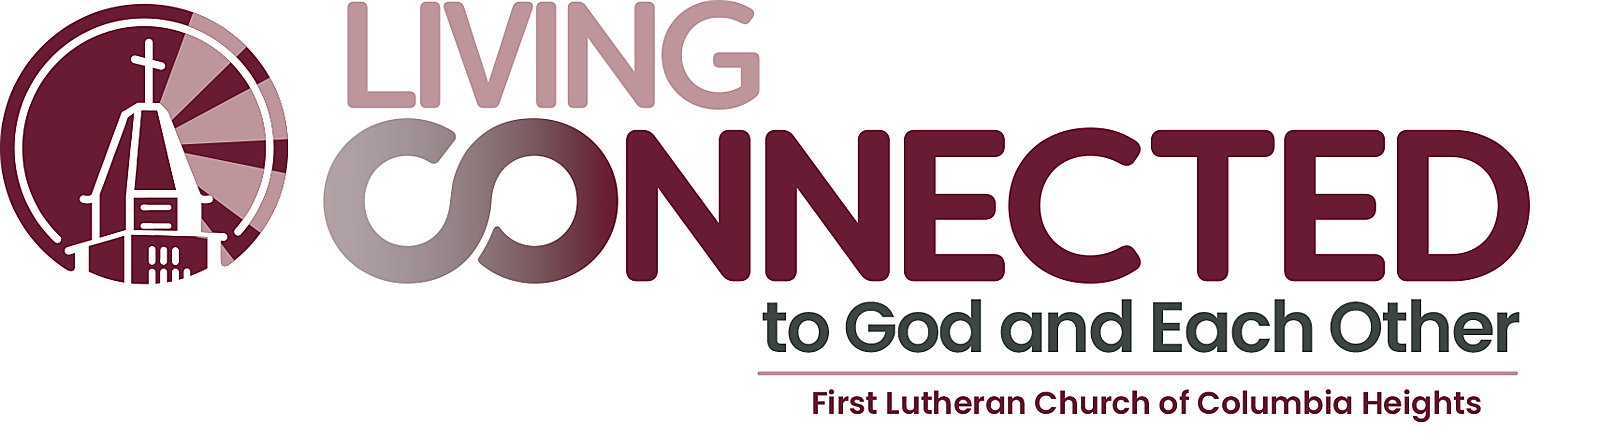 Please consider supporting our Food Ministry at First Lutheran Church. We provide Free meals to local children twice weekly, and to the adults & children in our community each Sunday. The annual cost to sustain these meals is $16,500.